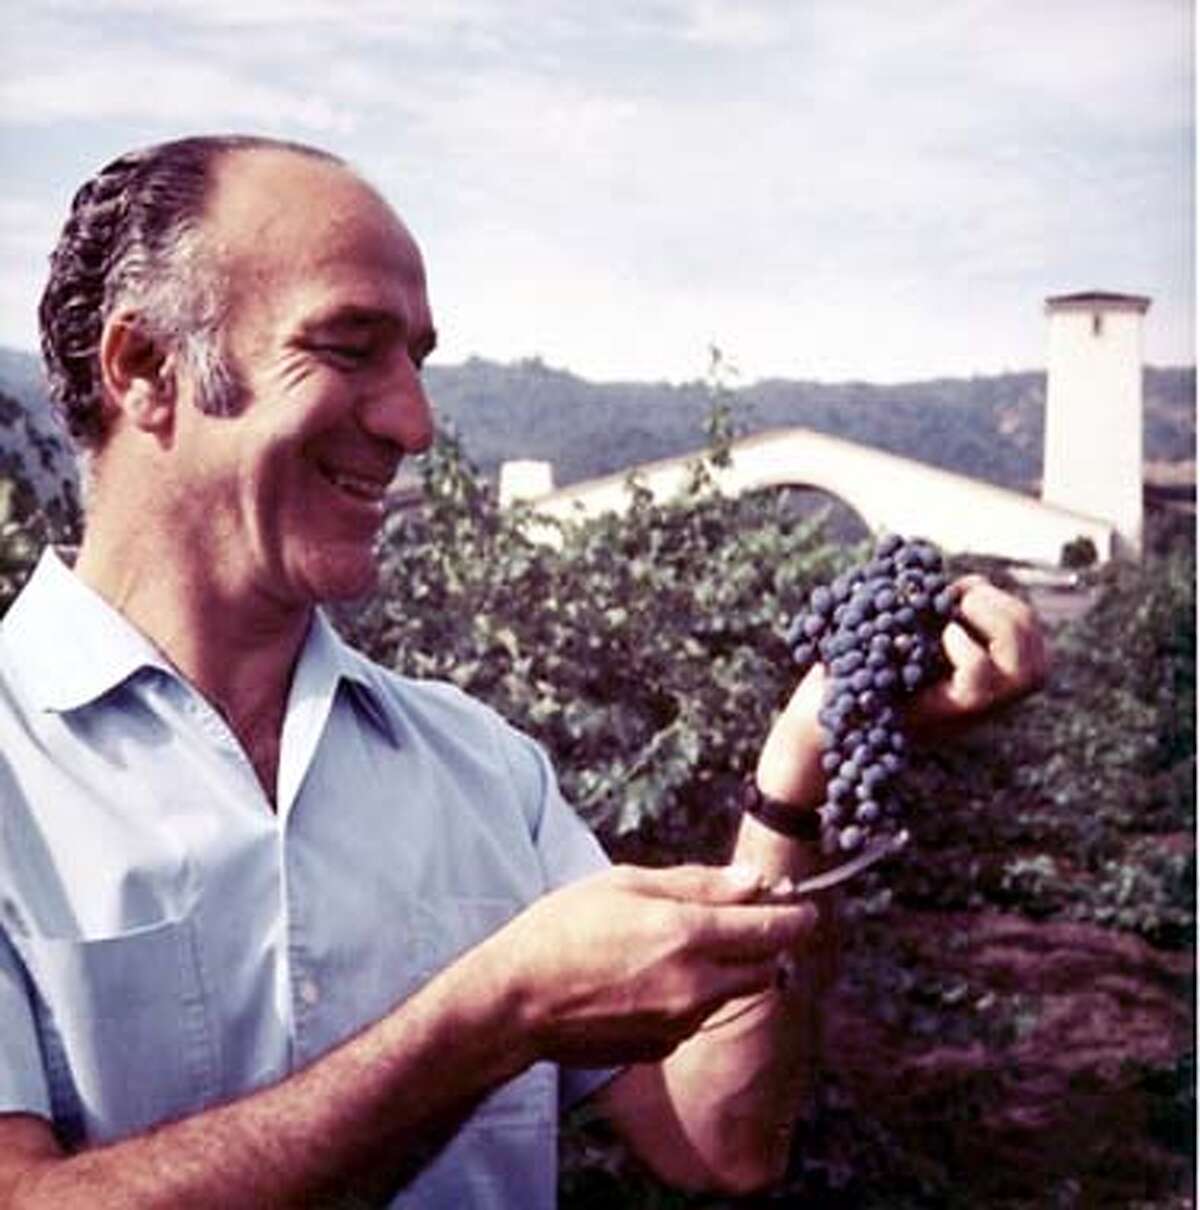 Mondavi in his winery's early years: "I never had any doubt I could achieve my goal," he says.